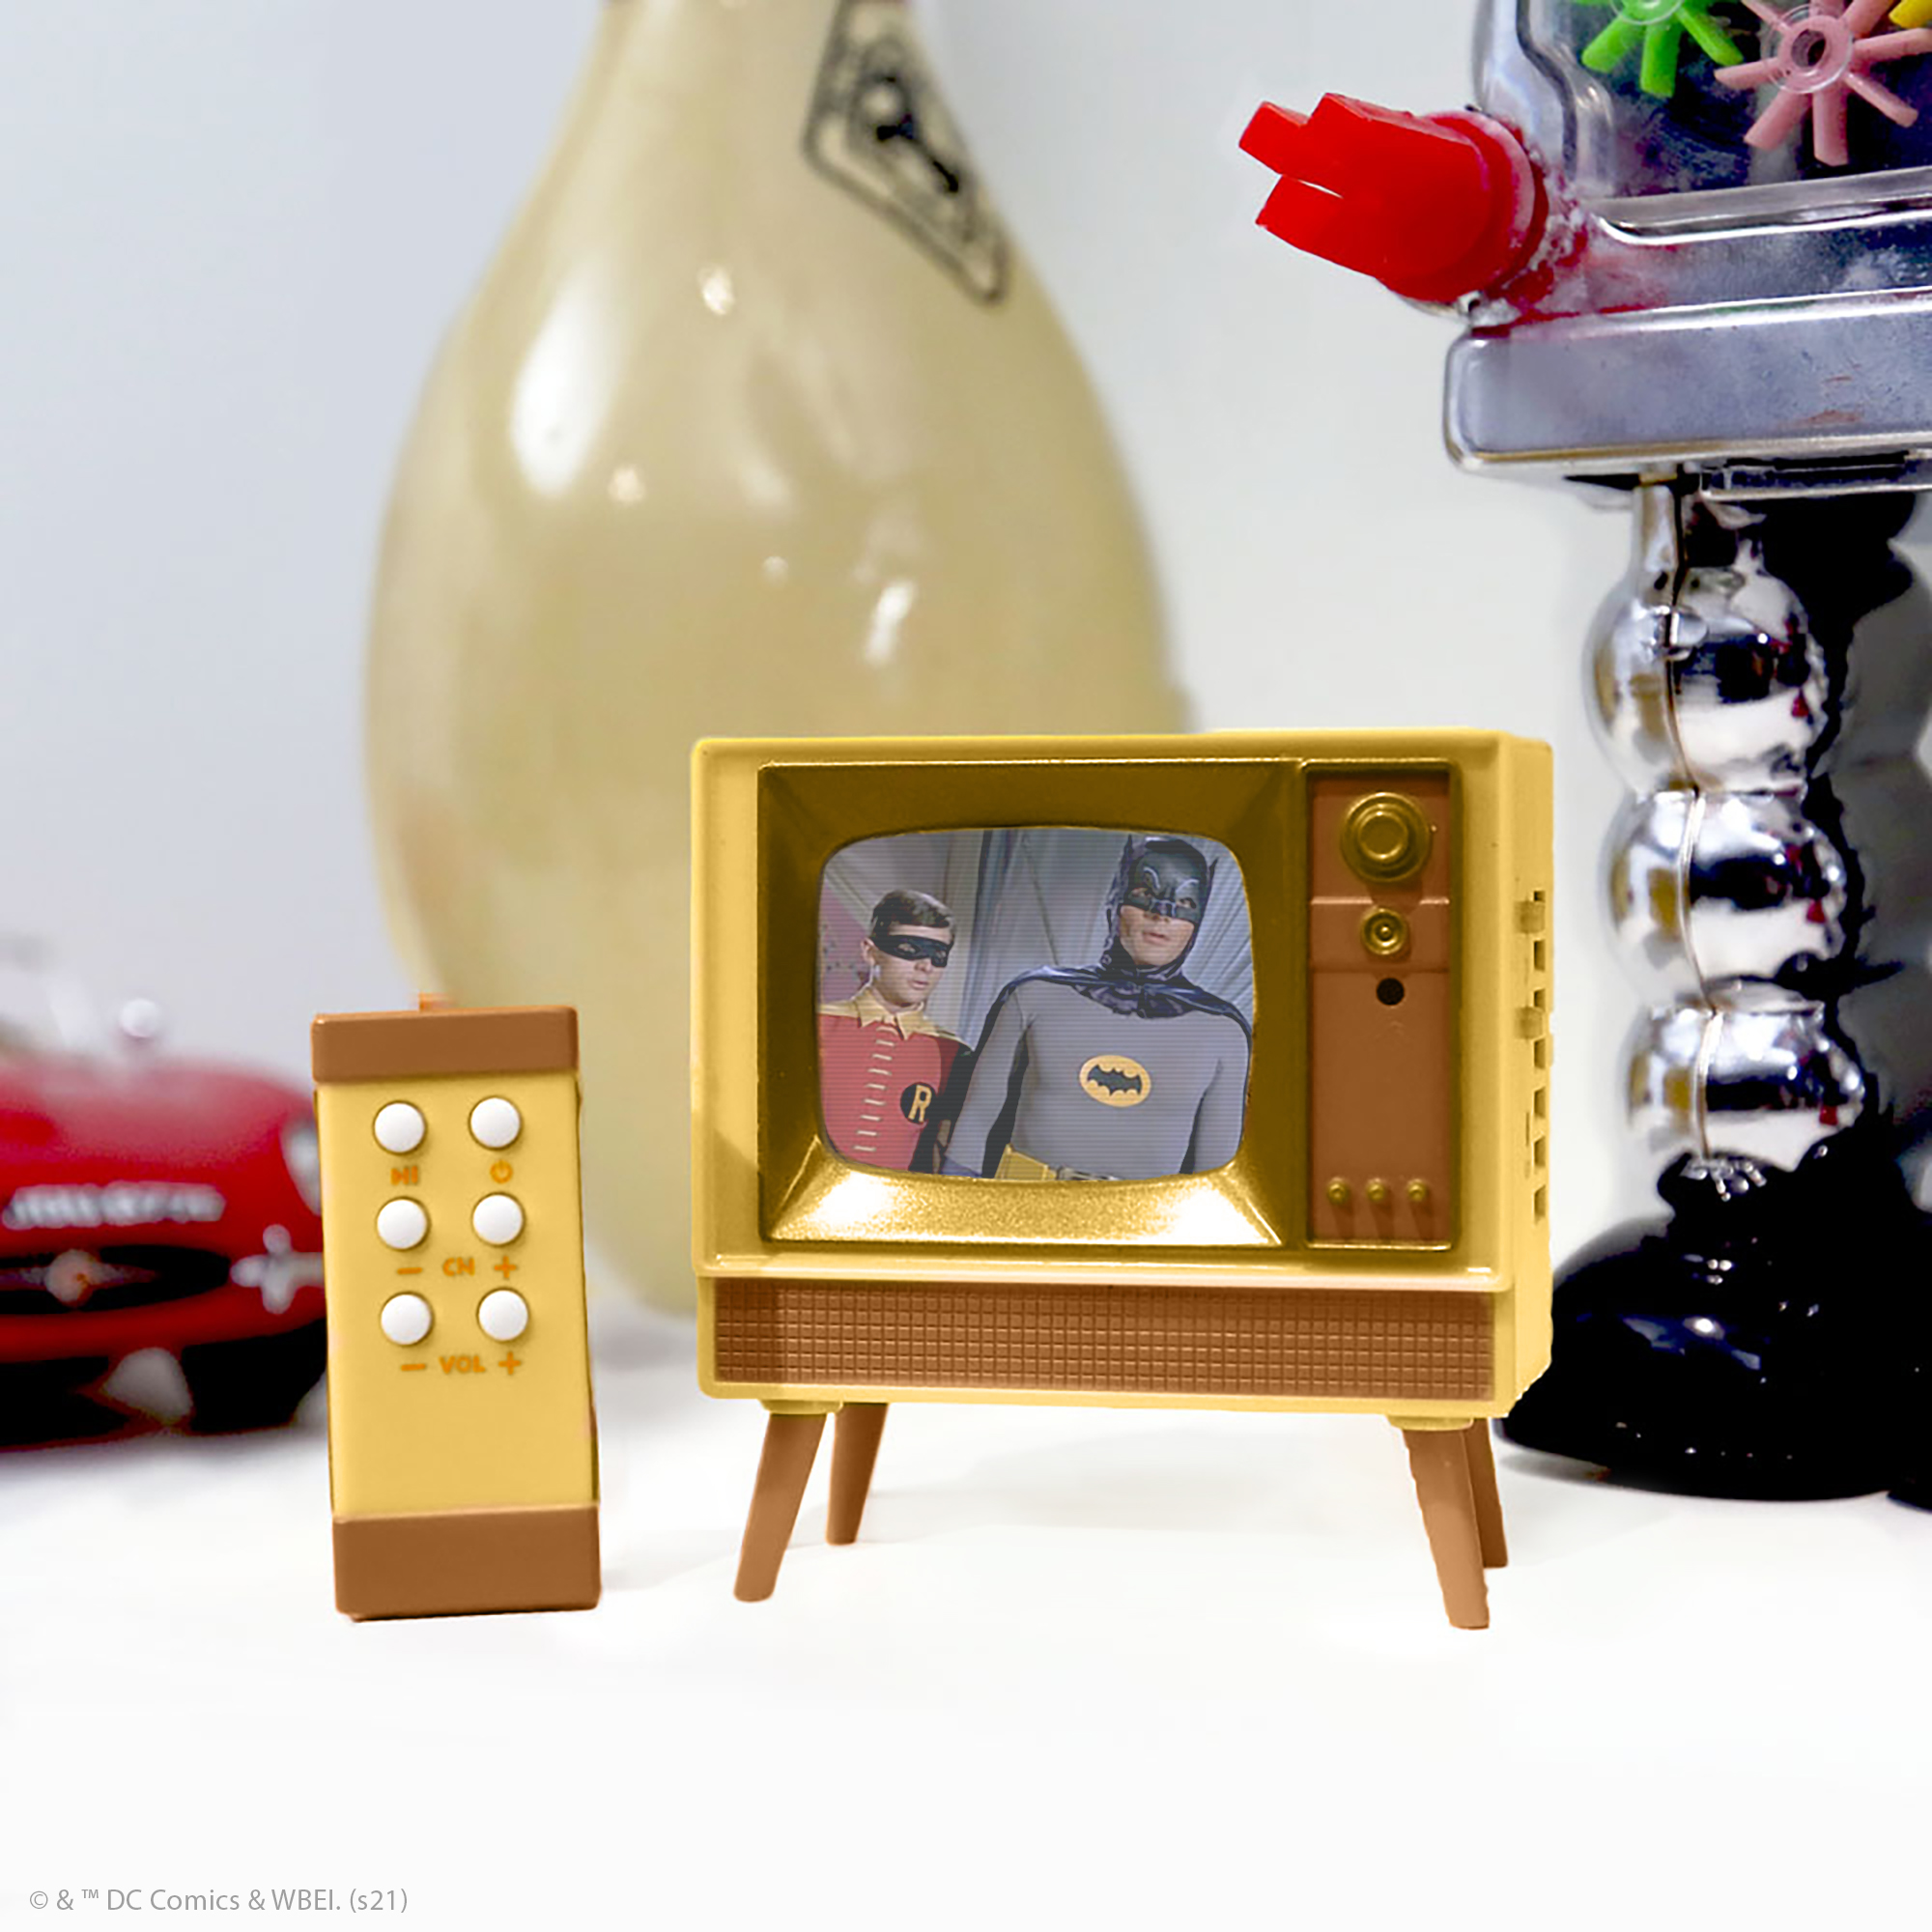 NEW FALL '21 - Tiny TV Classics - Batman Edition- Newest Collectible from Basic Fun - Watch top Batman scenes on a real-working Tiny TV (with working remote)! - image 5 of 12